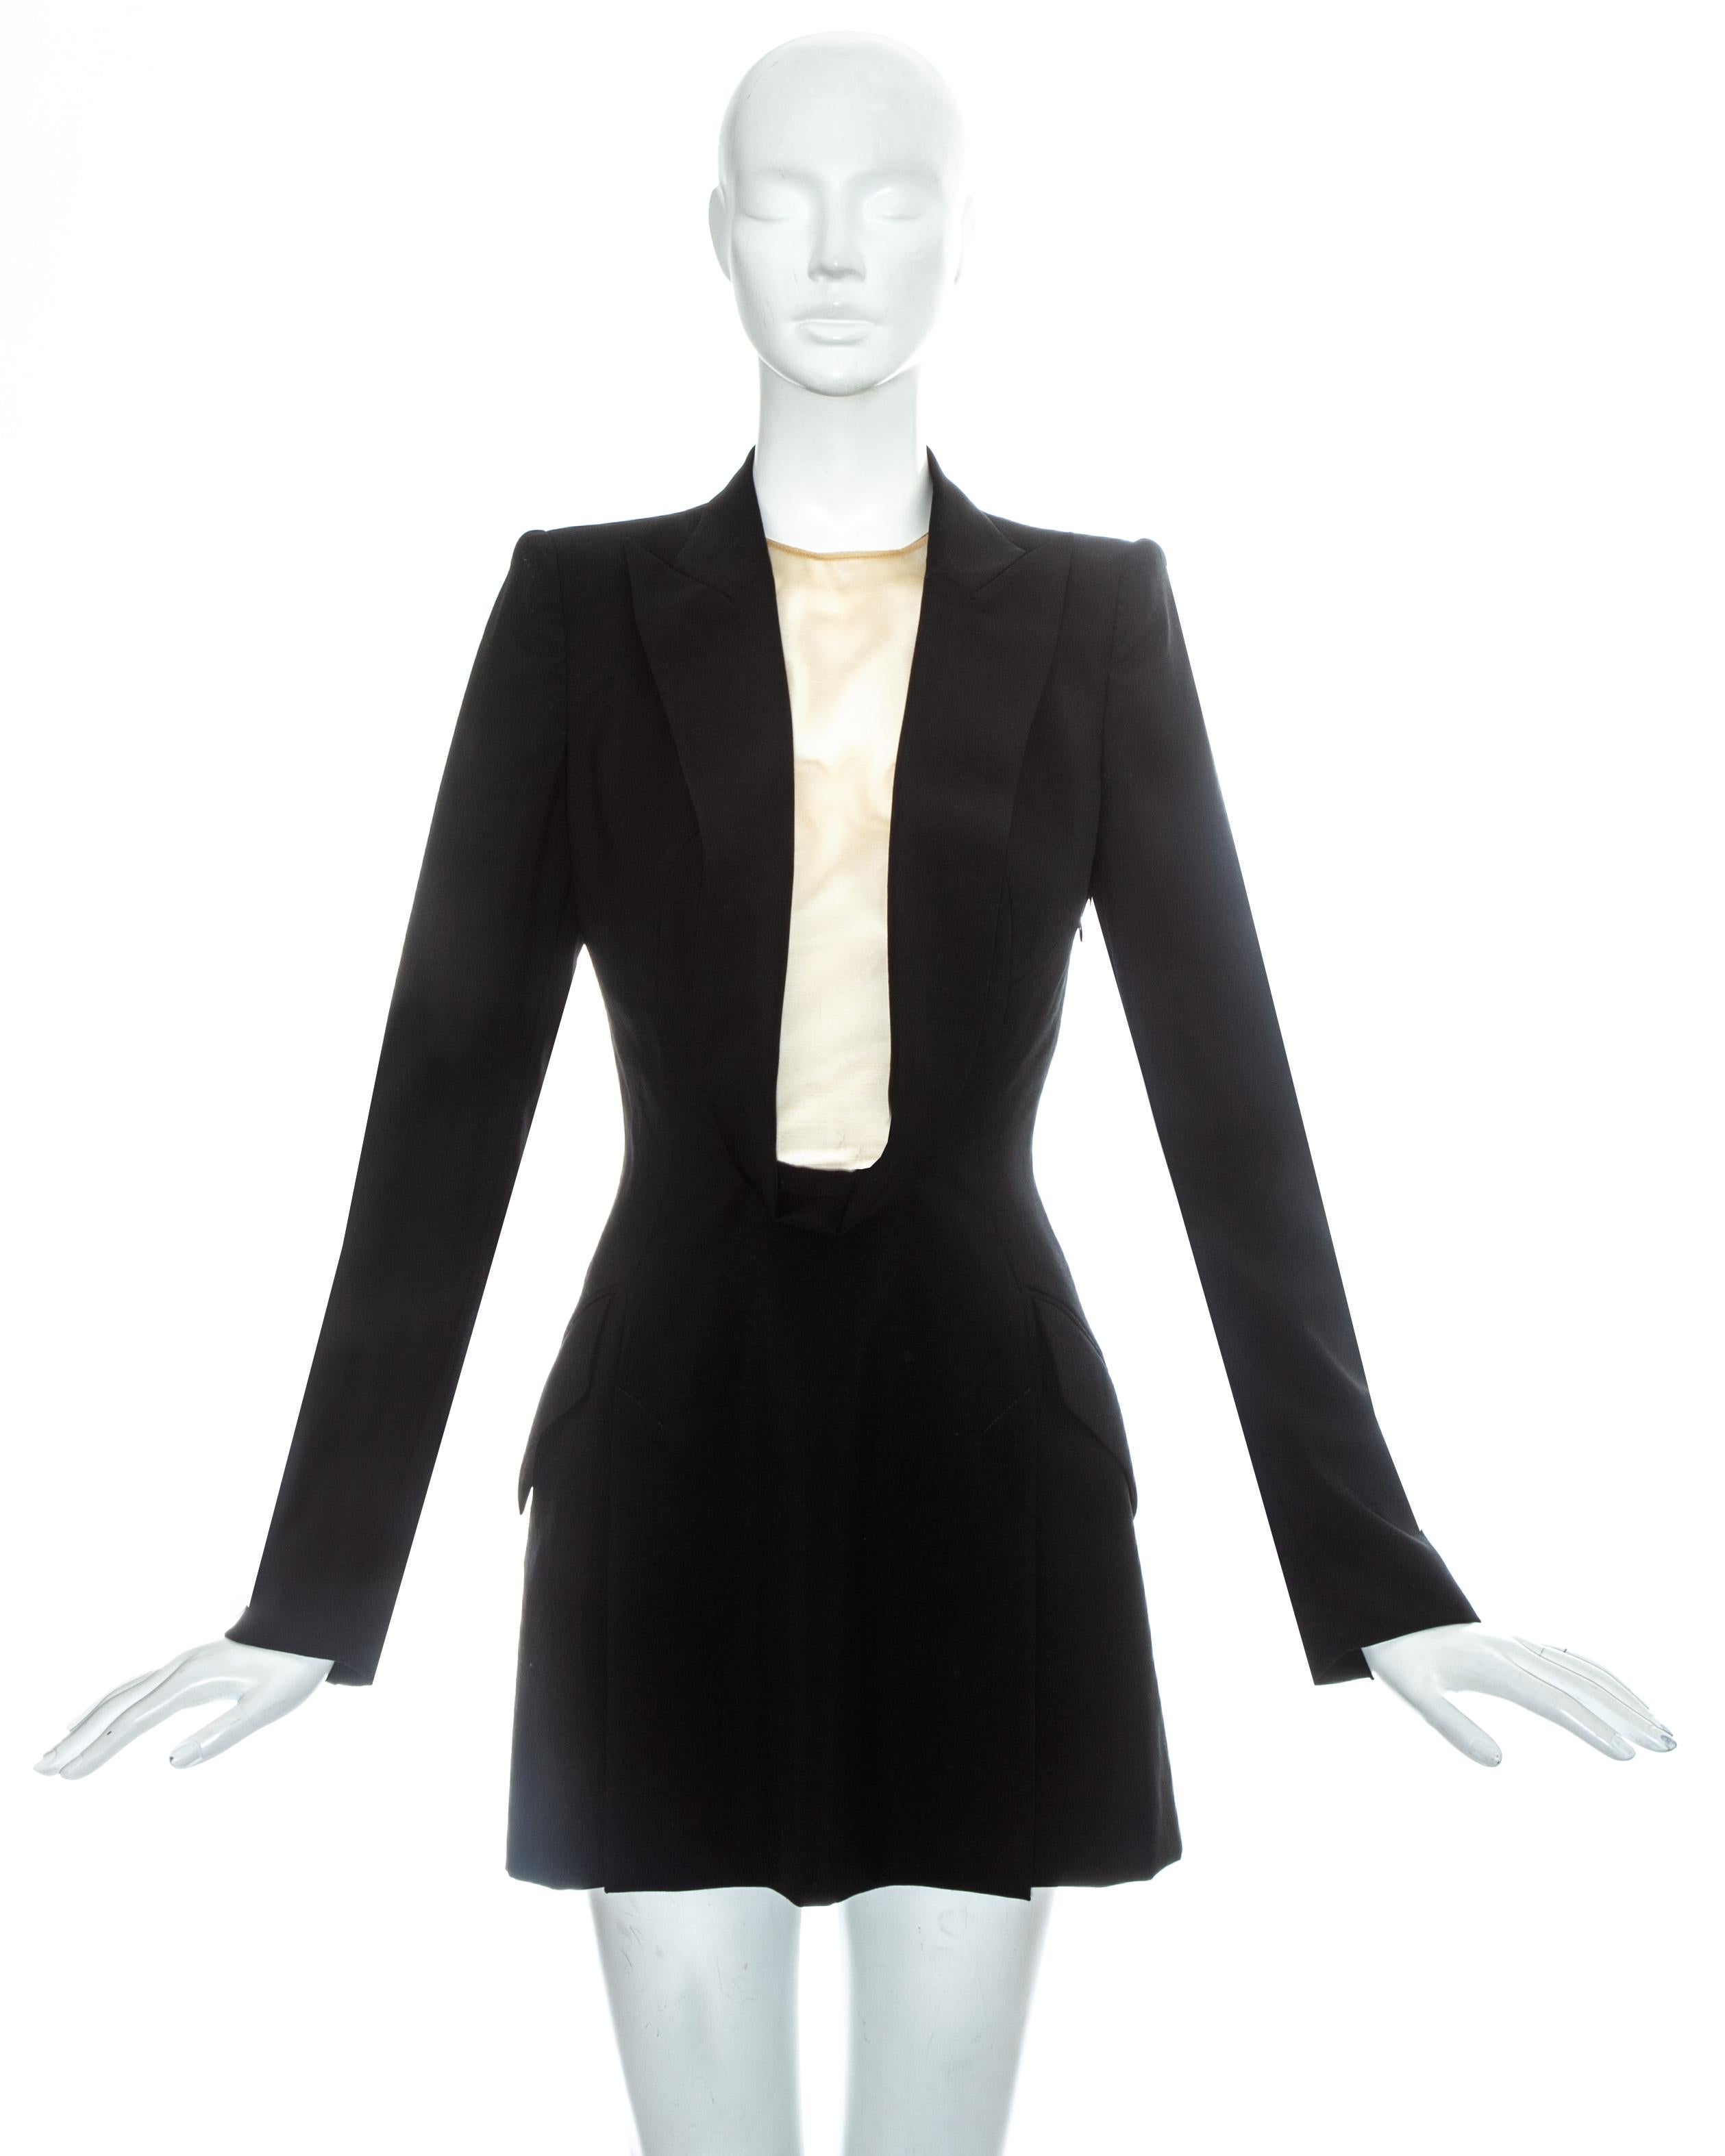 Alexander McQueen black wool blazer mini dress with shawl lapel, deep cleavage with nude mesh and front vent on skirt.

Golden Shower, Spring-Summer 1998